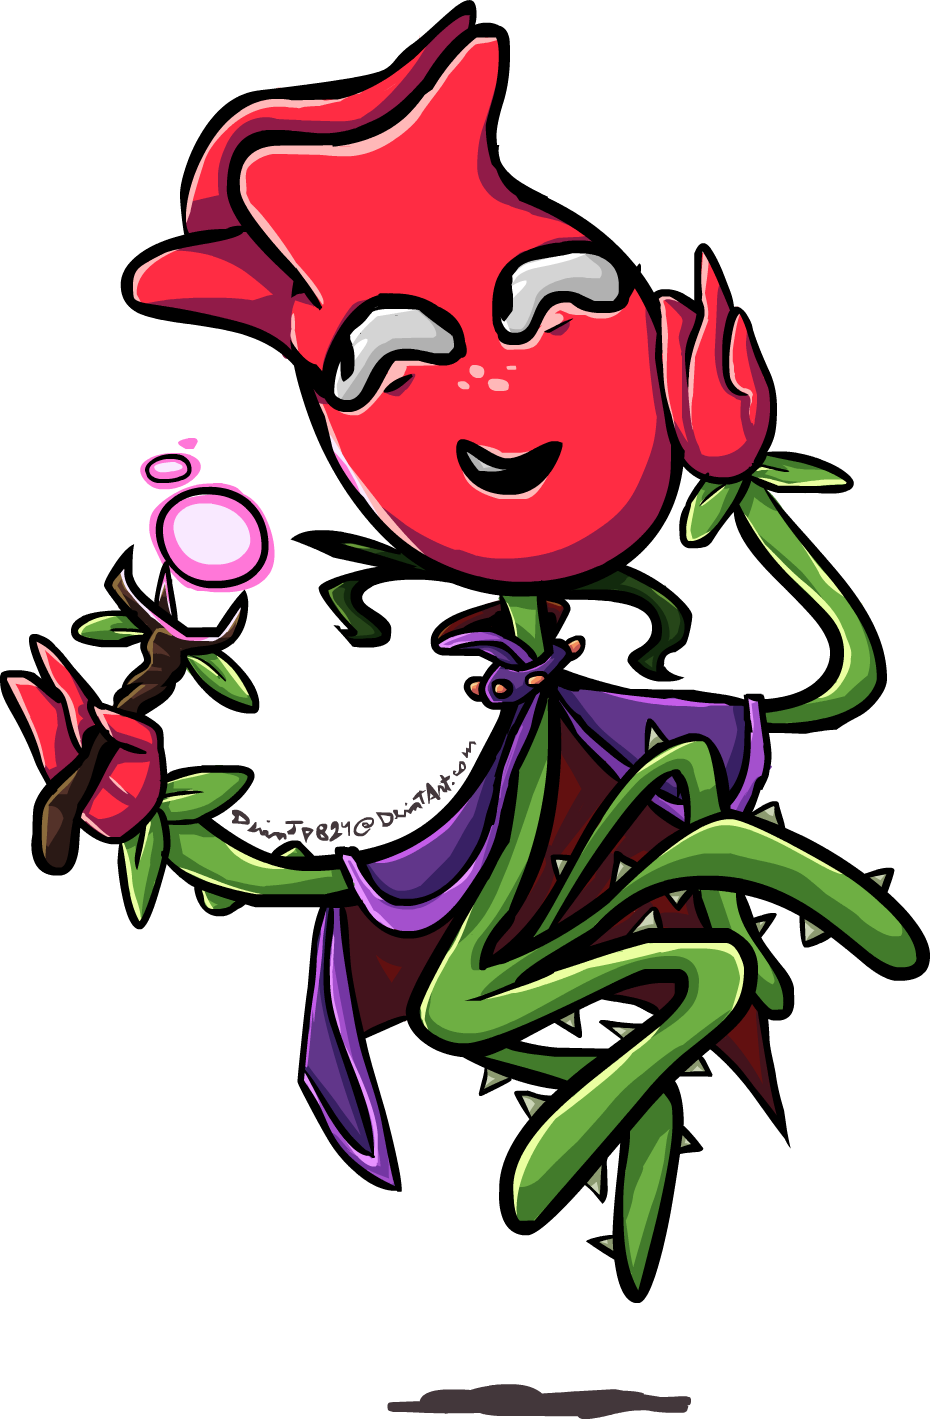 PVZHeroes Rose By DevianJp824 On DeviantArt